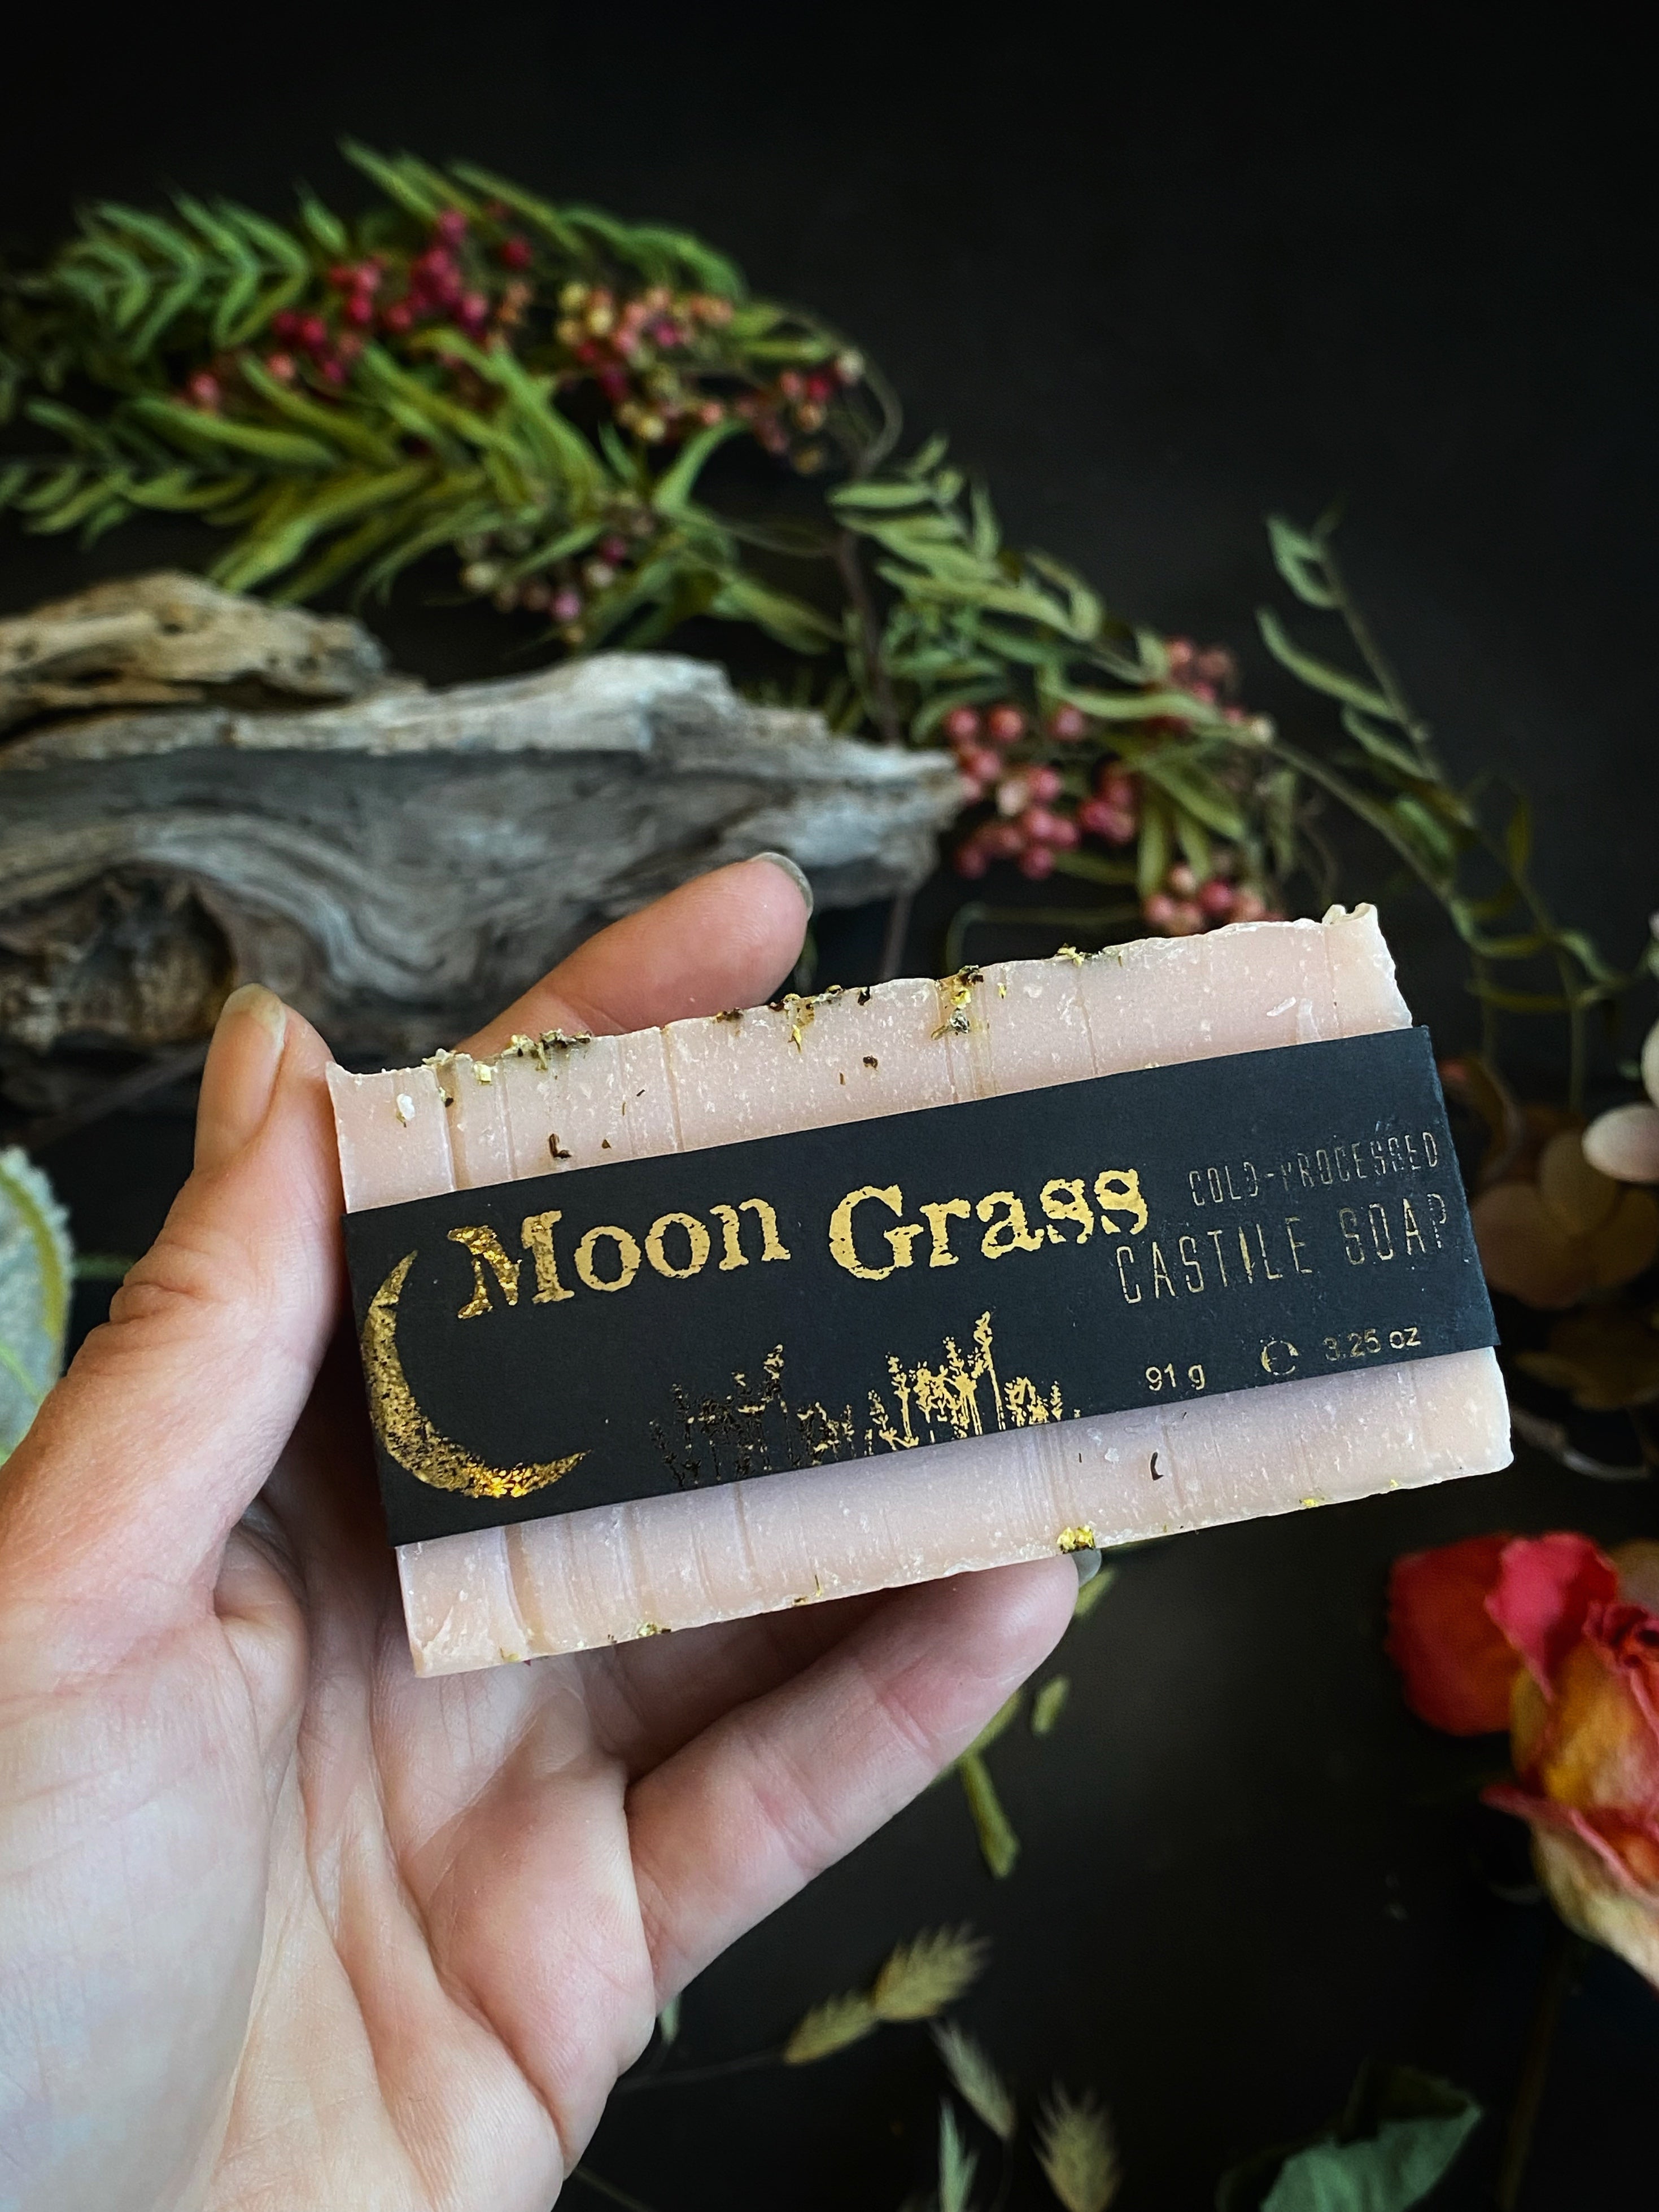 Moon Grass - Artisan, Superfatted, Cold- Processed Castile Soap for the Face and Body?